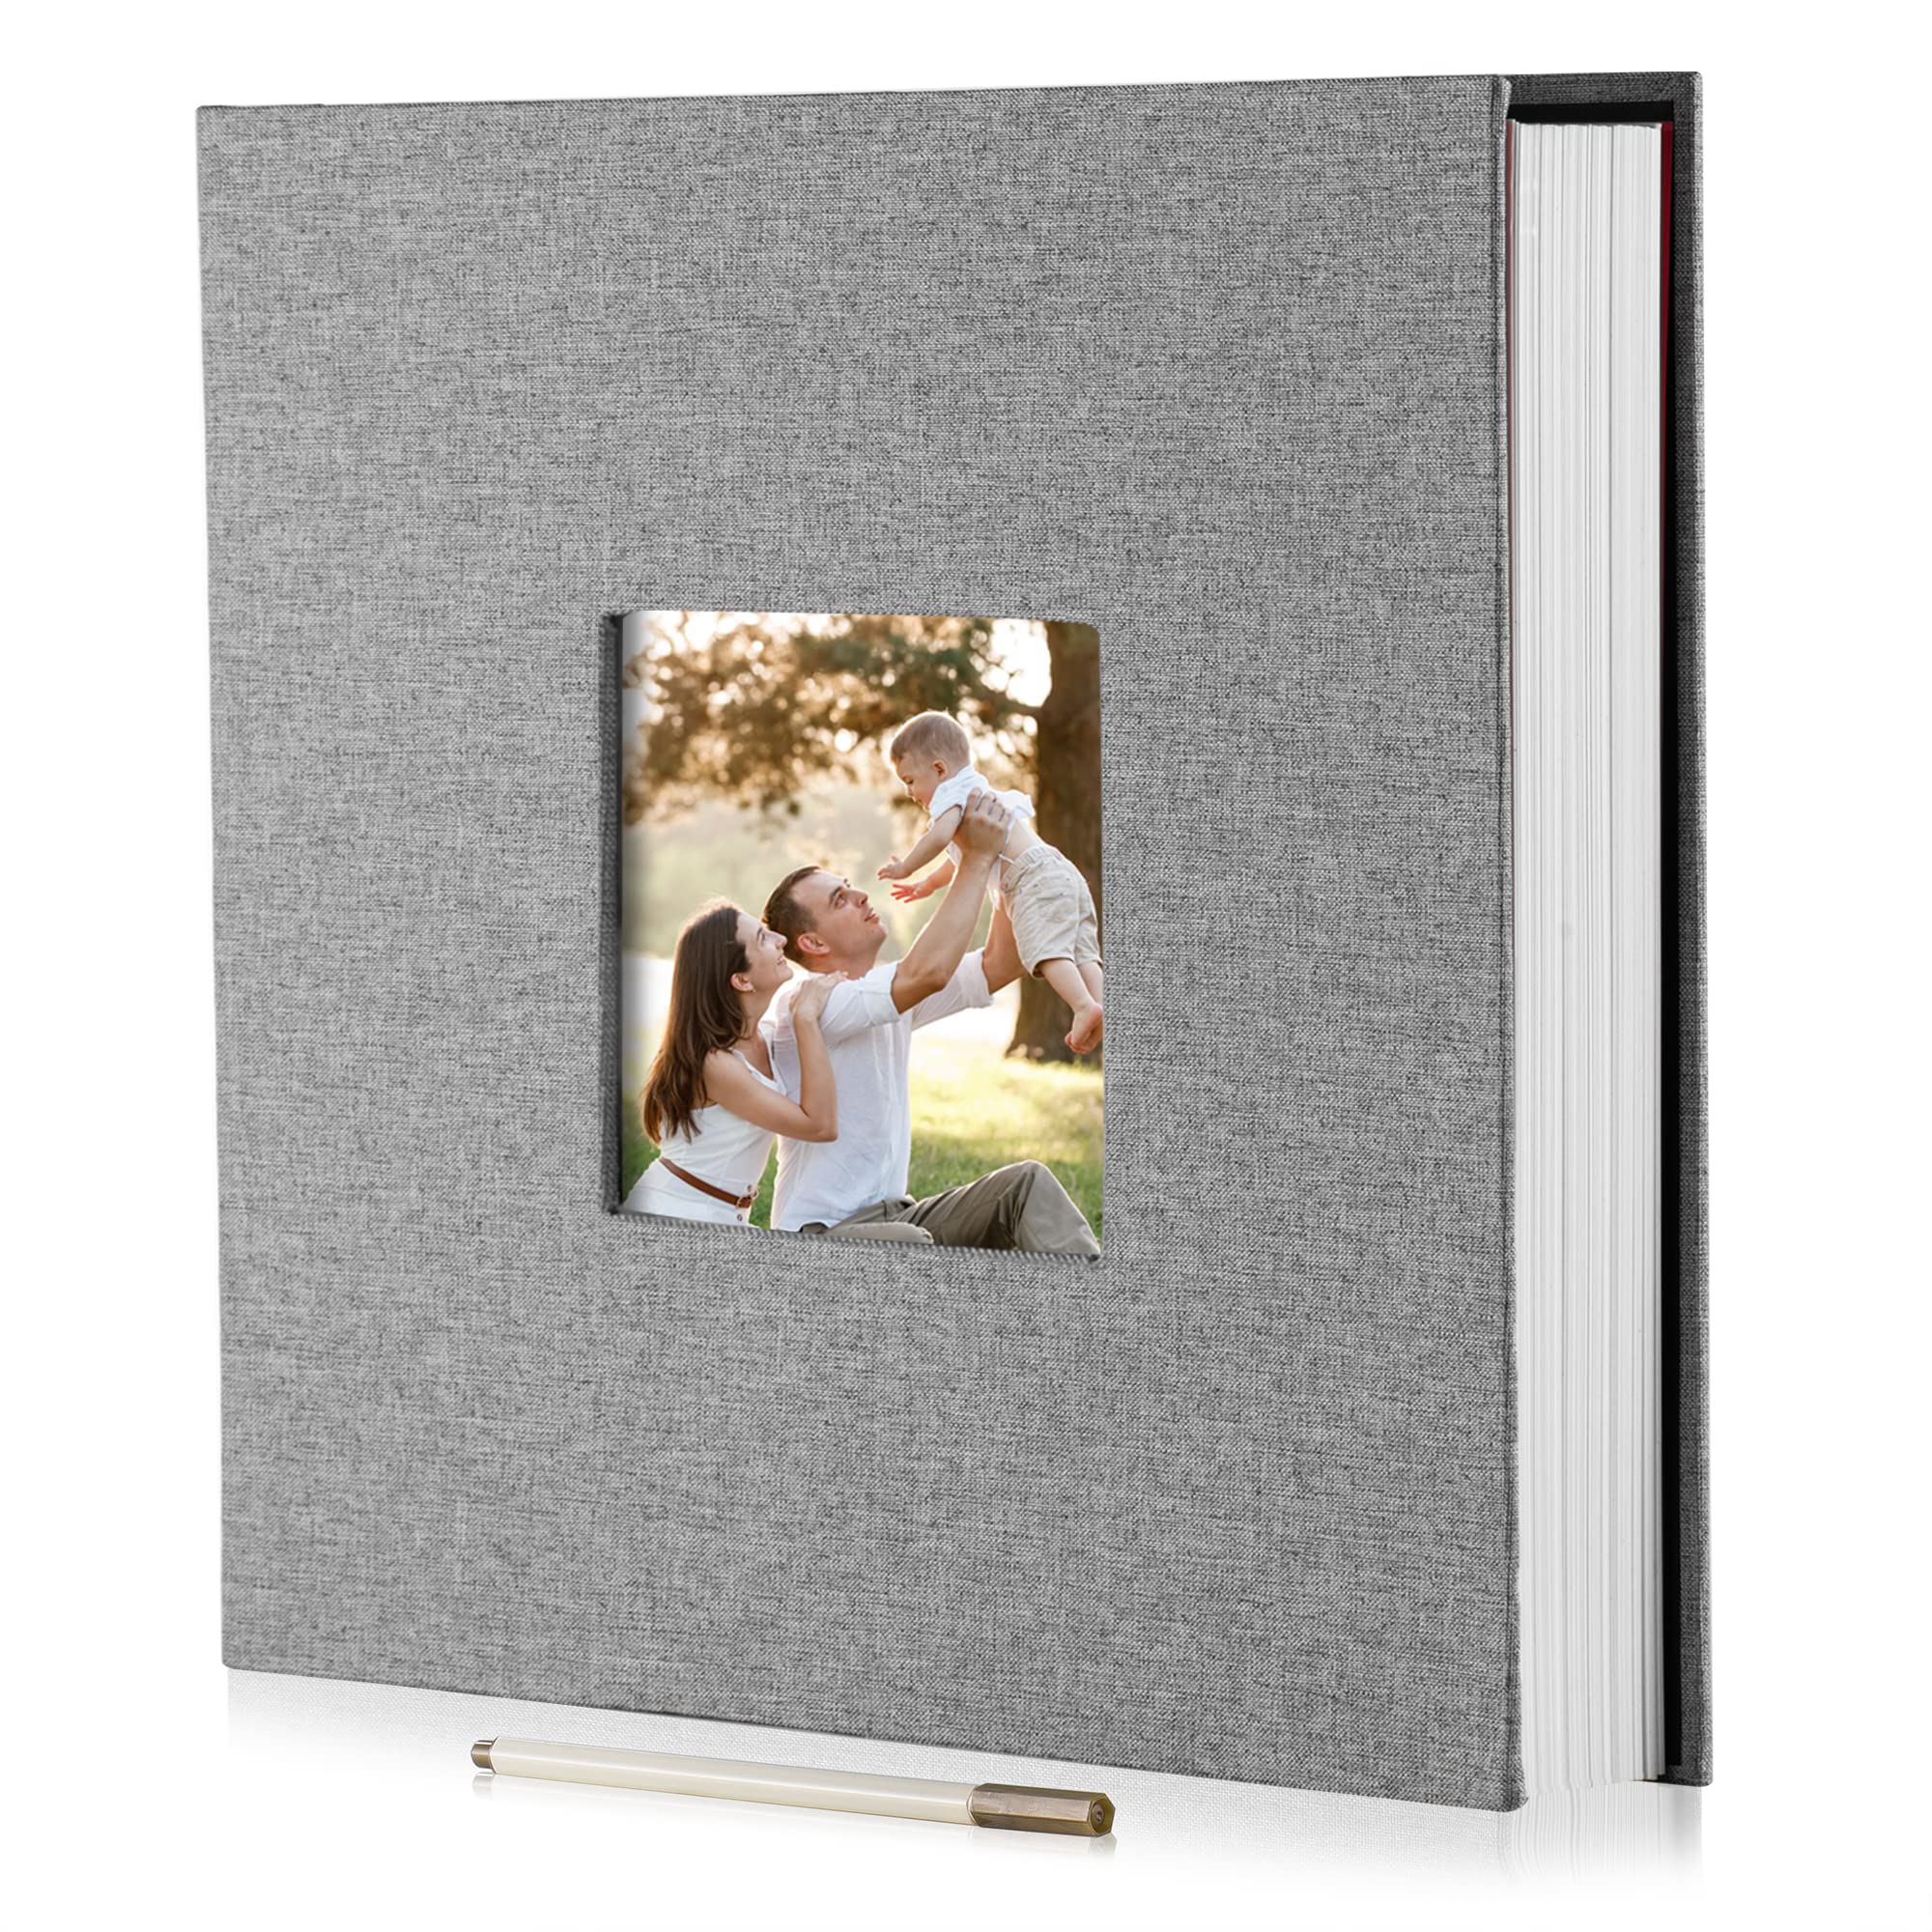 LOVEER Photo Album Self Adhesive Scrapbook Album for 4x6 5x7 8x10 Pictures,  Linen Cover with 40 Pages DIY Photo Book,Birthday Gifts for Women Mom